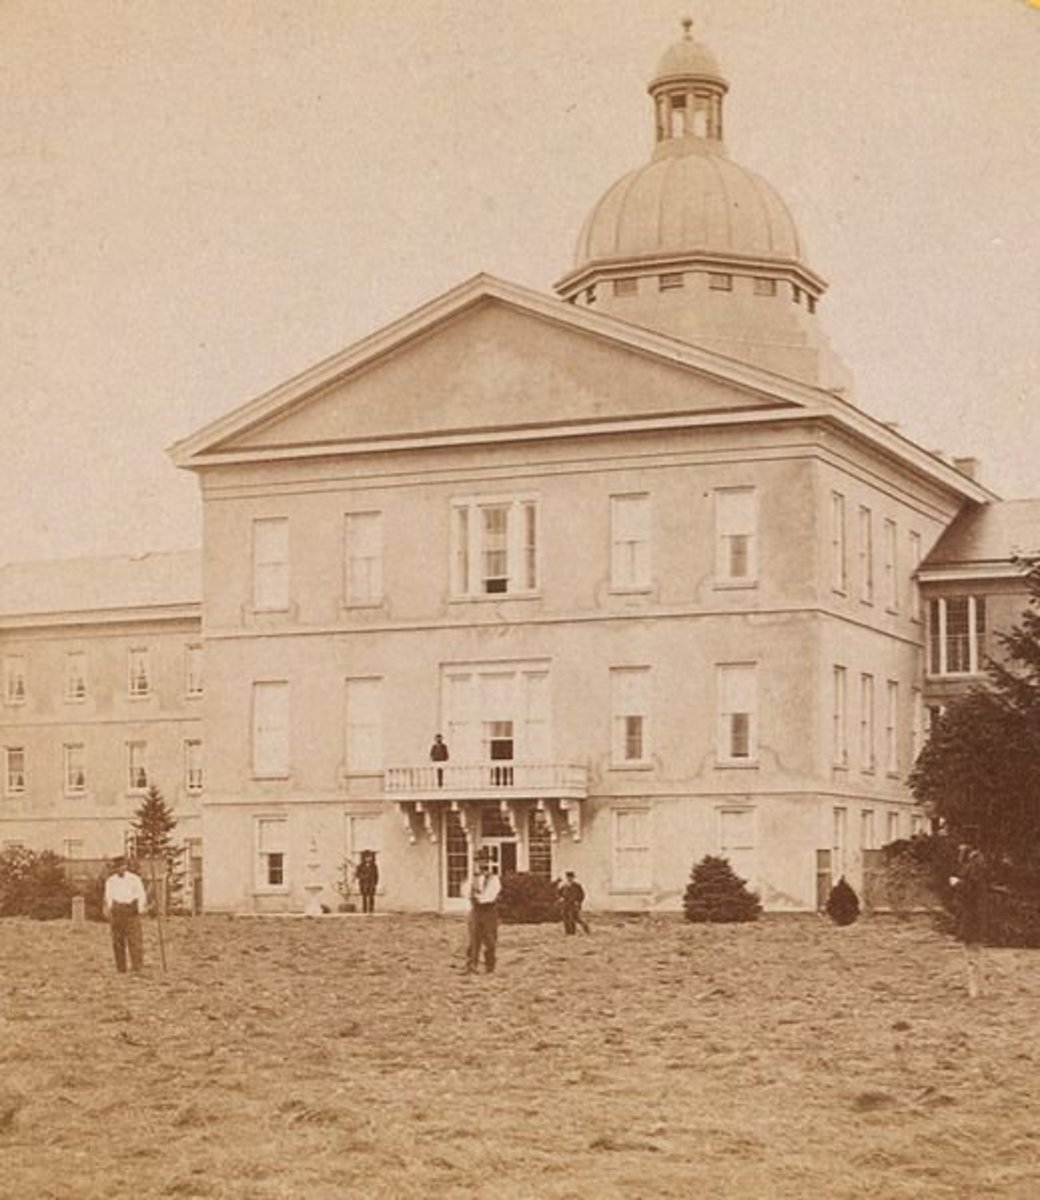 The Pennsylvania State Lunatic Hospital was one of the oldest hospitals for the mentally ill.